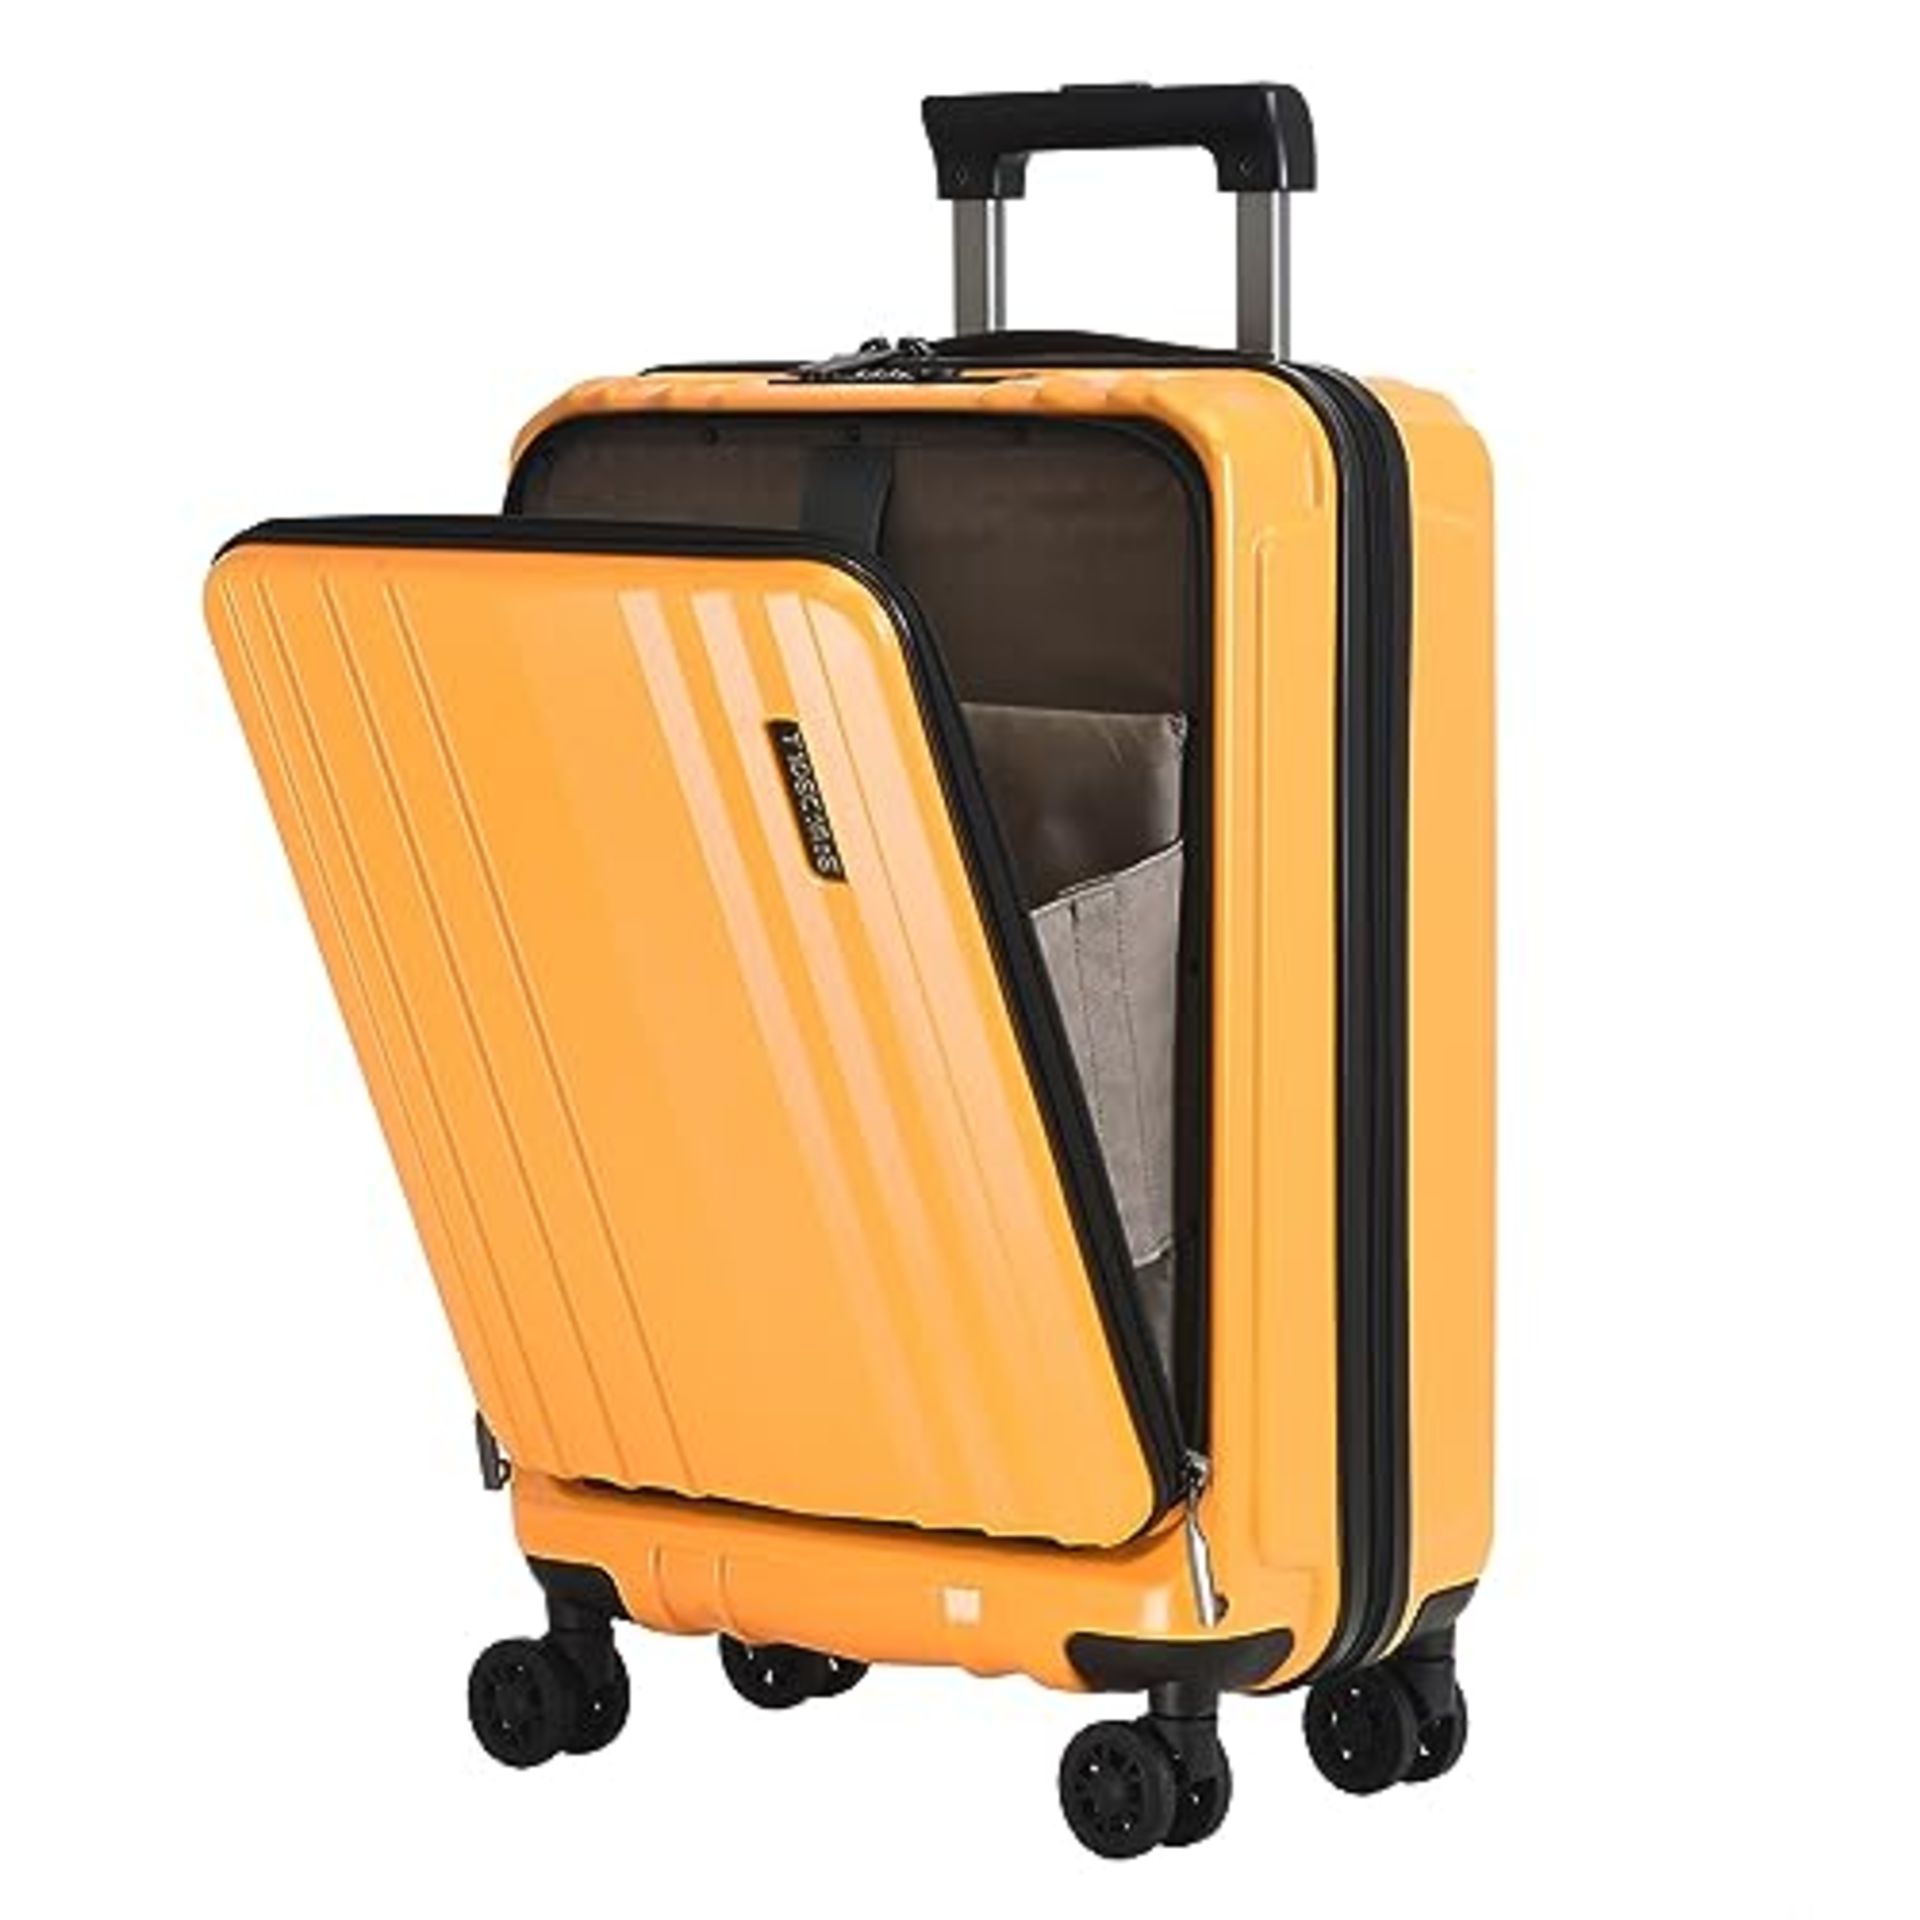 RRP £106.16 TydeCkare Carry On 55x35x23cm Luggage with Front Pocket for 15.6" Laptop